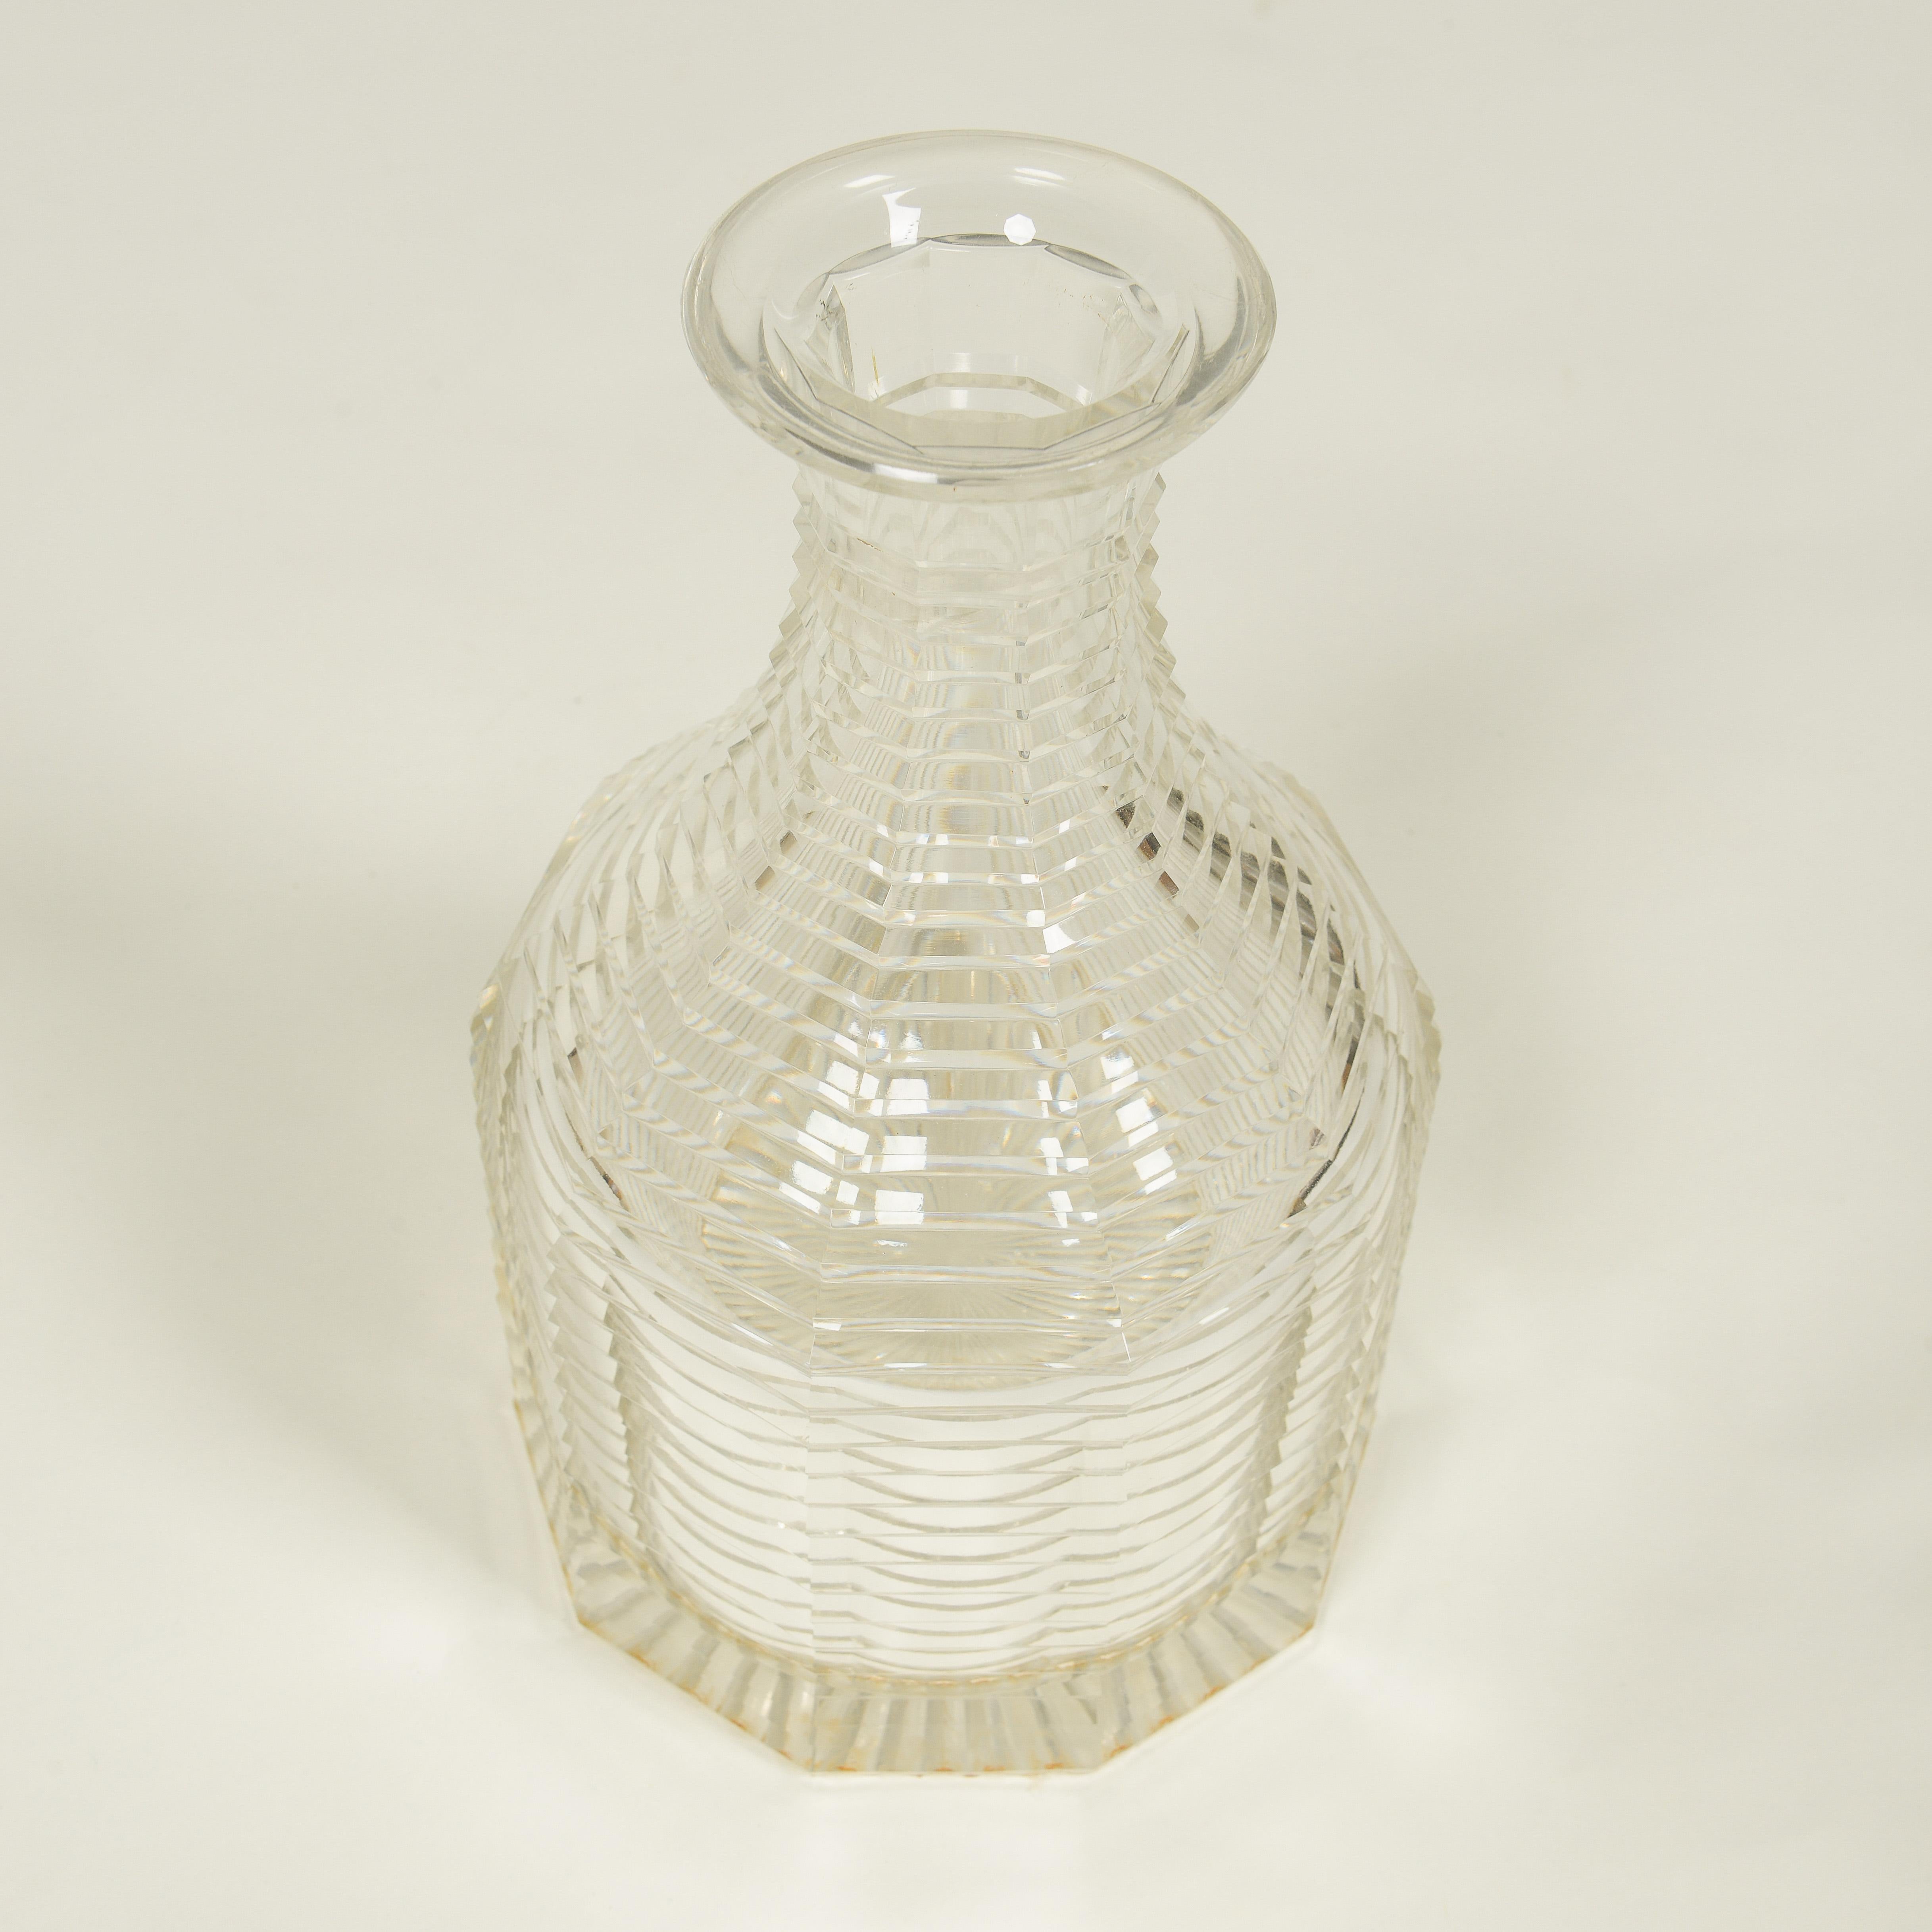 English Cut Crystal Decanter In Excellent Condition For Sale In New York, NY